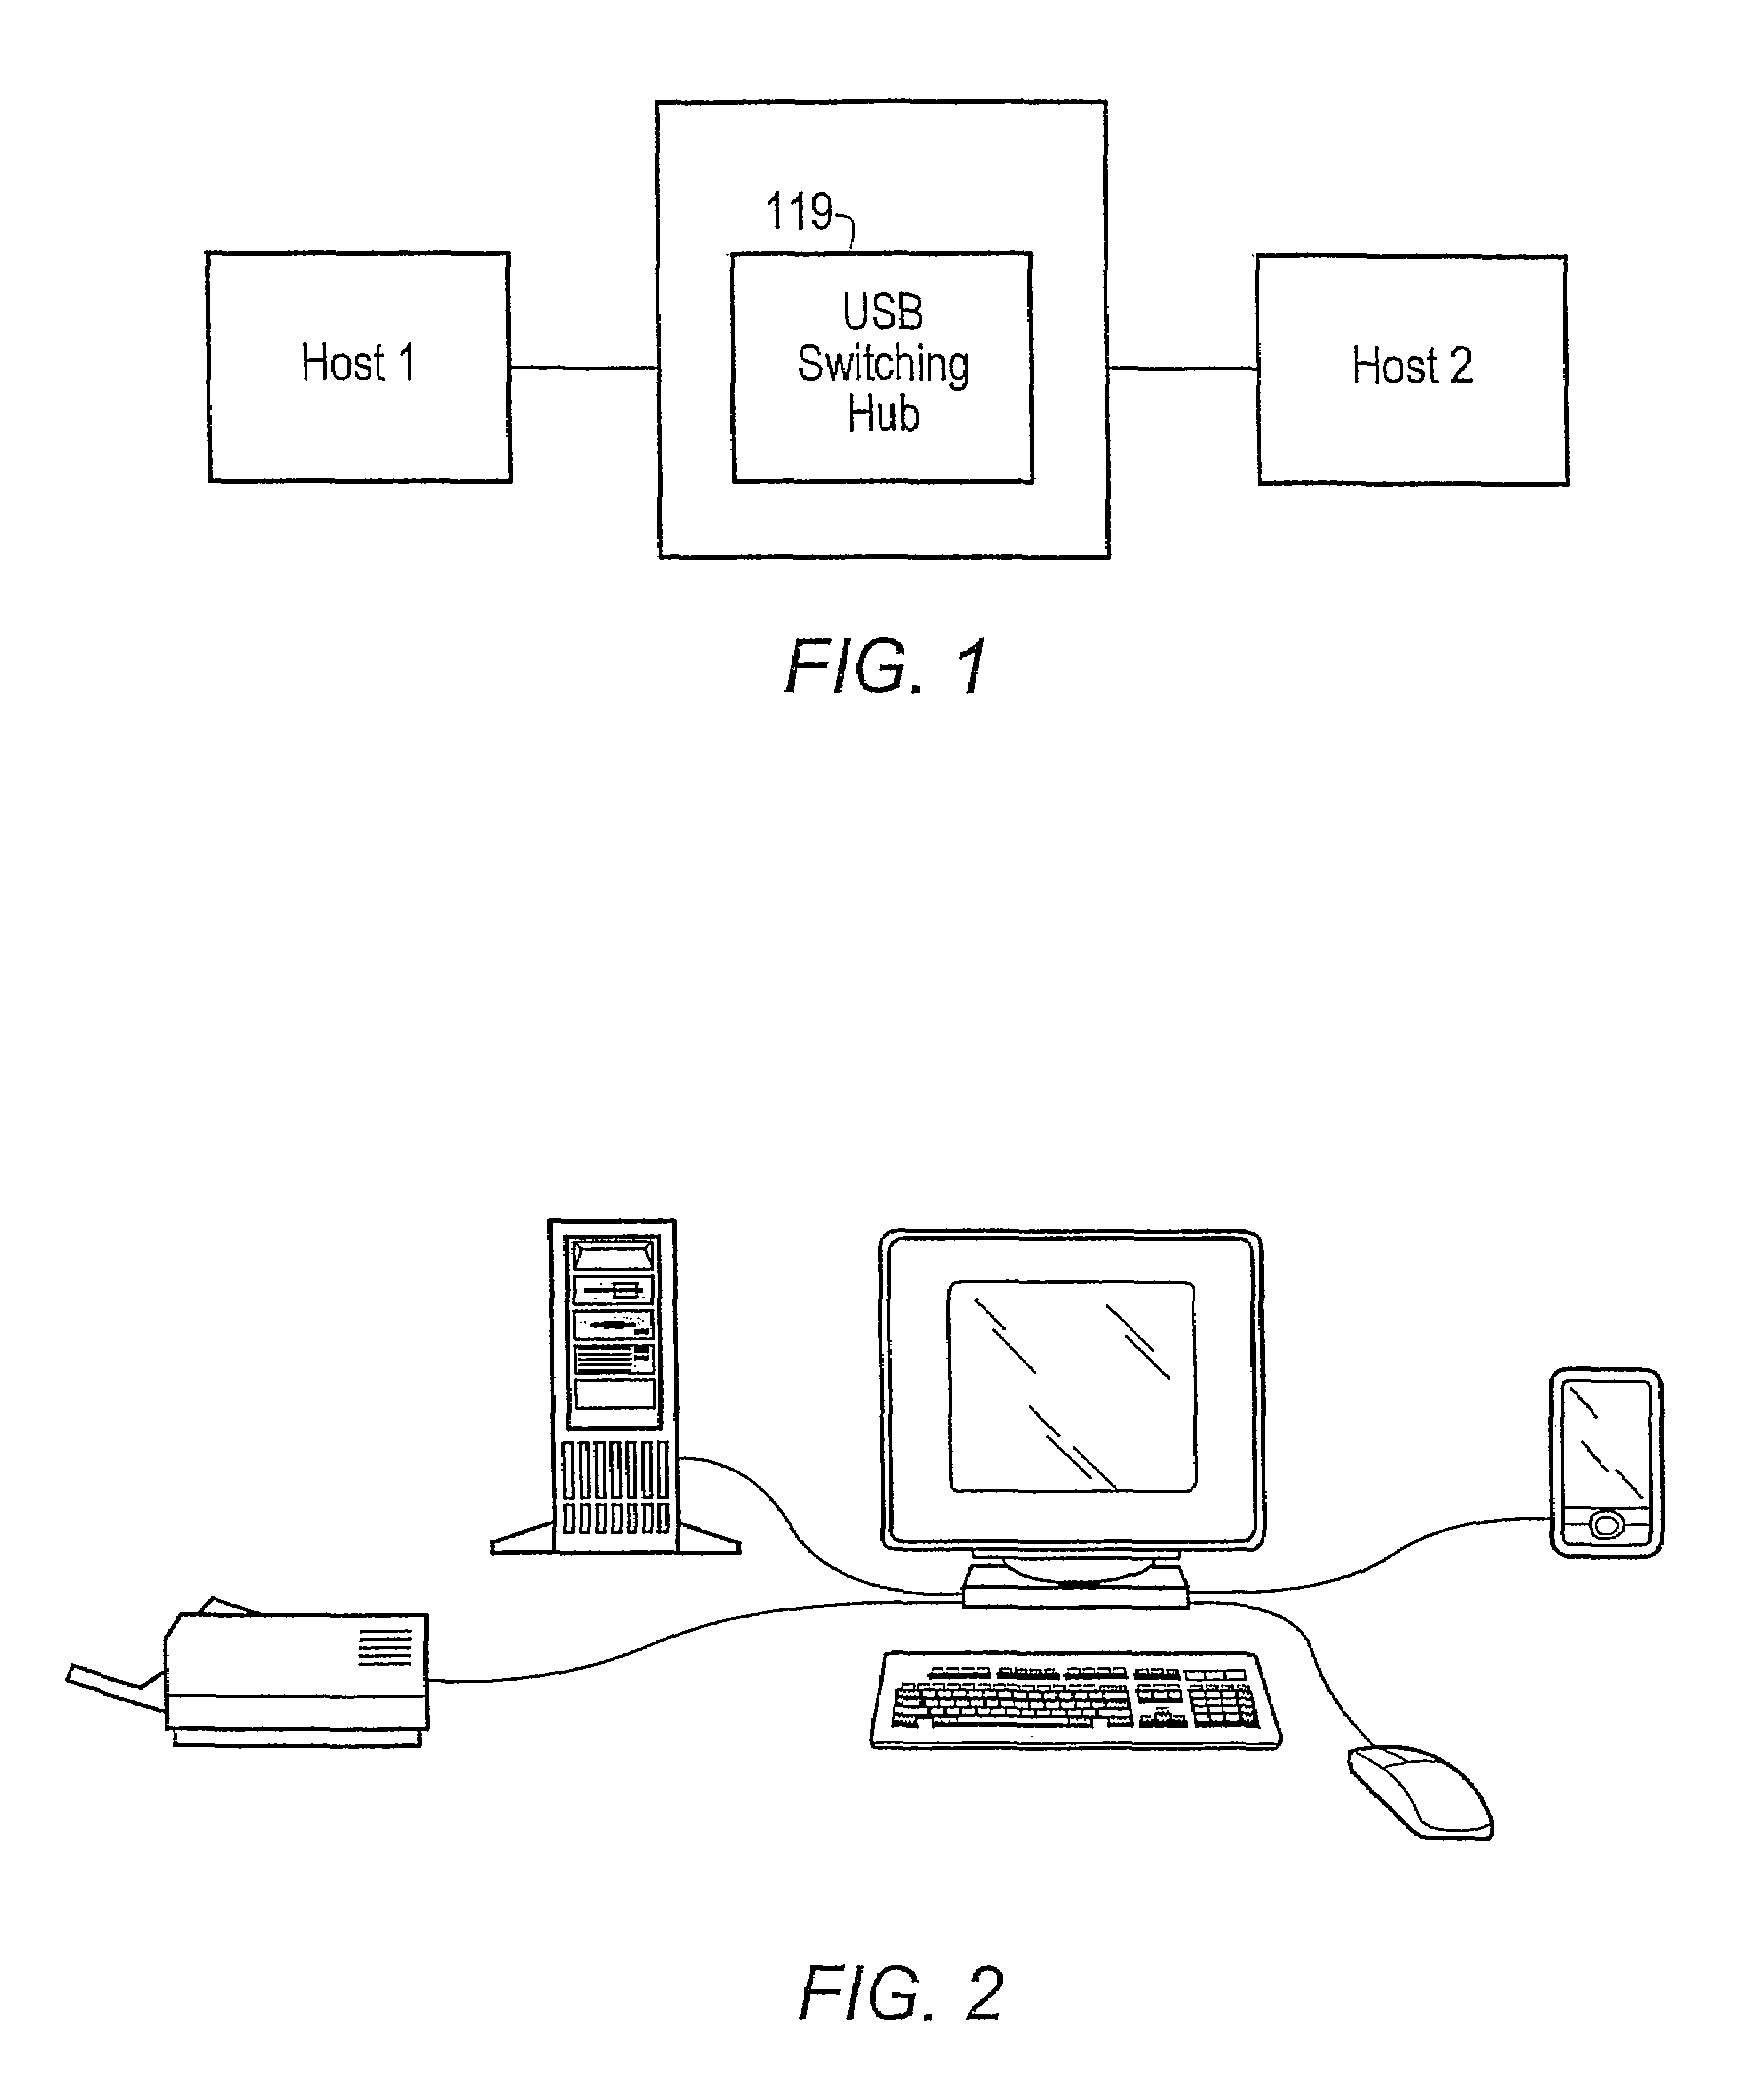 Method for automatically switching USB peripherals between USB hosts